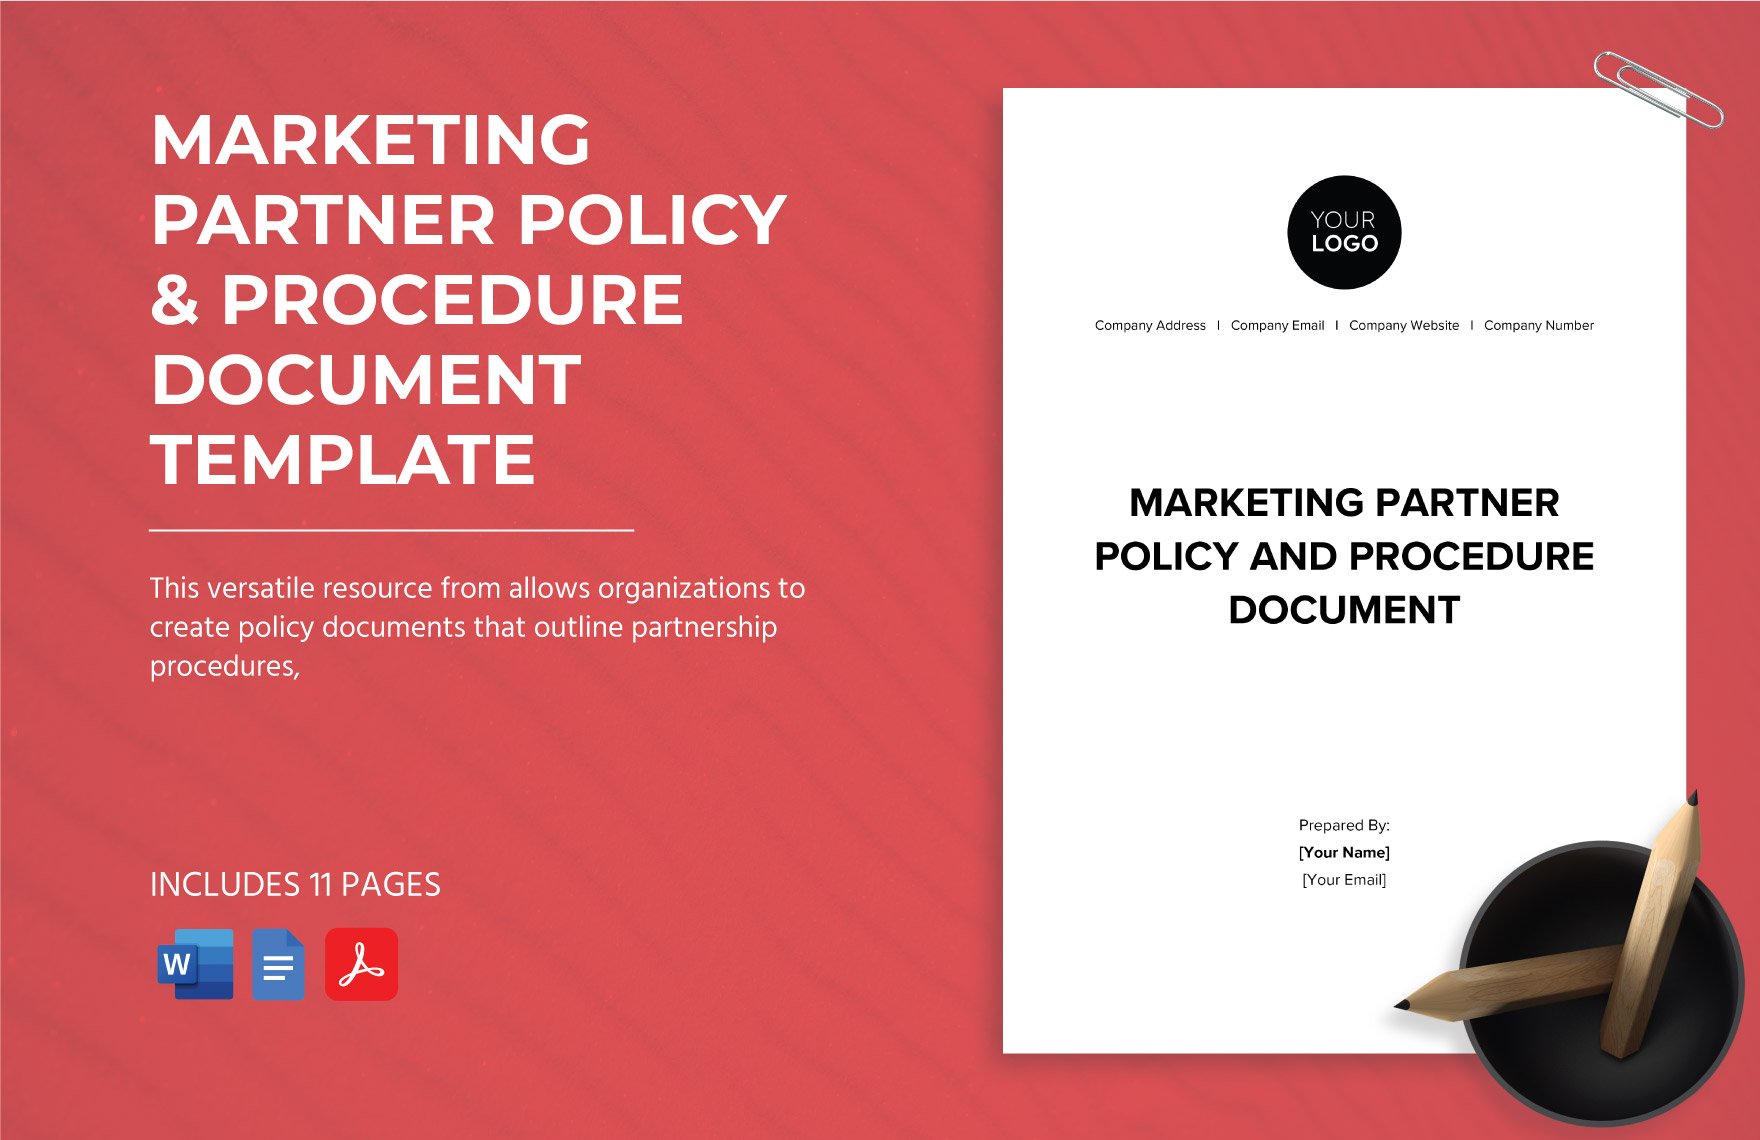 Marketing Partner Policy & Procedure Document Template in Word, Google Docs, PDF